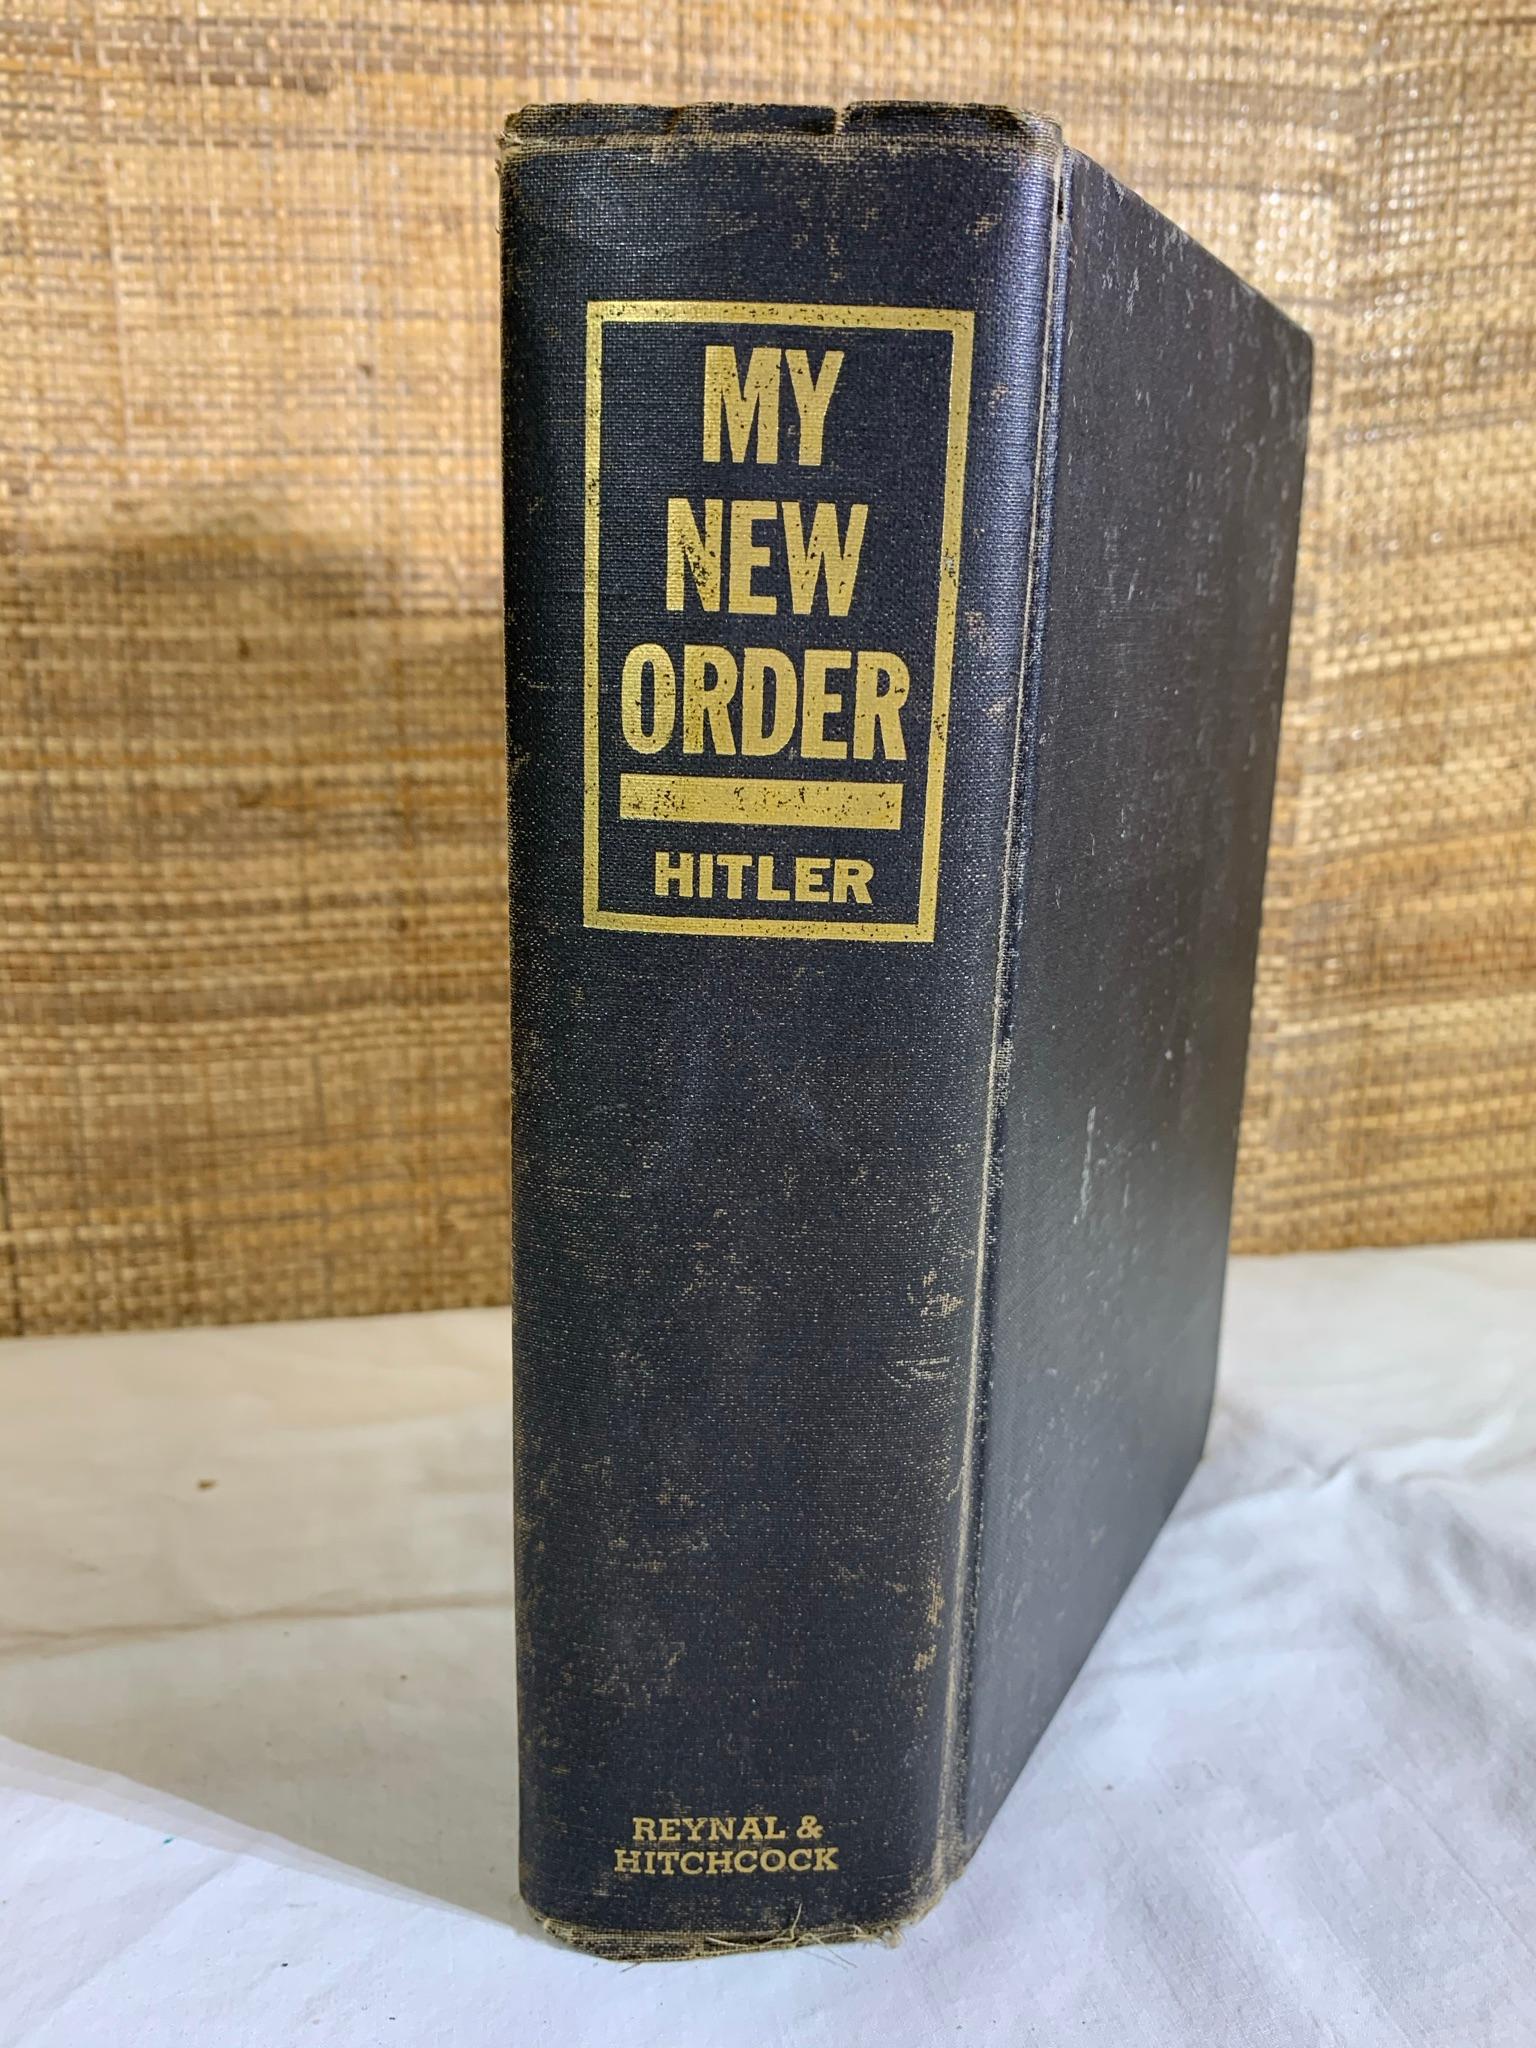 1st US Ed. Book My New Order by Adolph Hitler - 1941